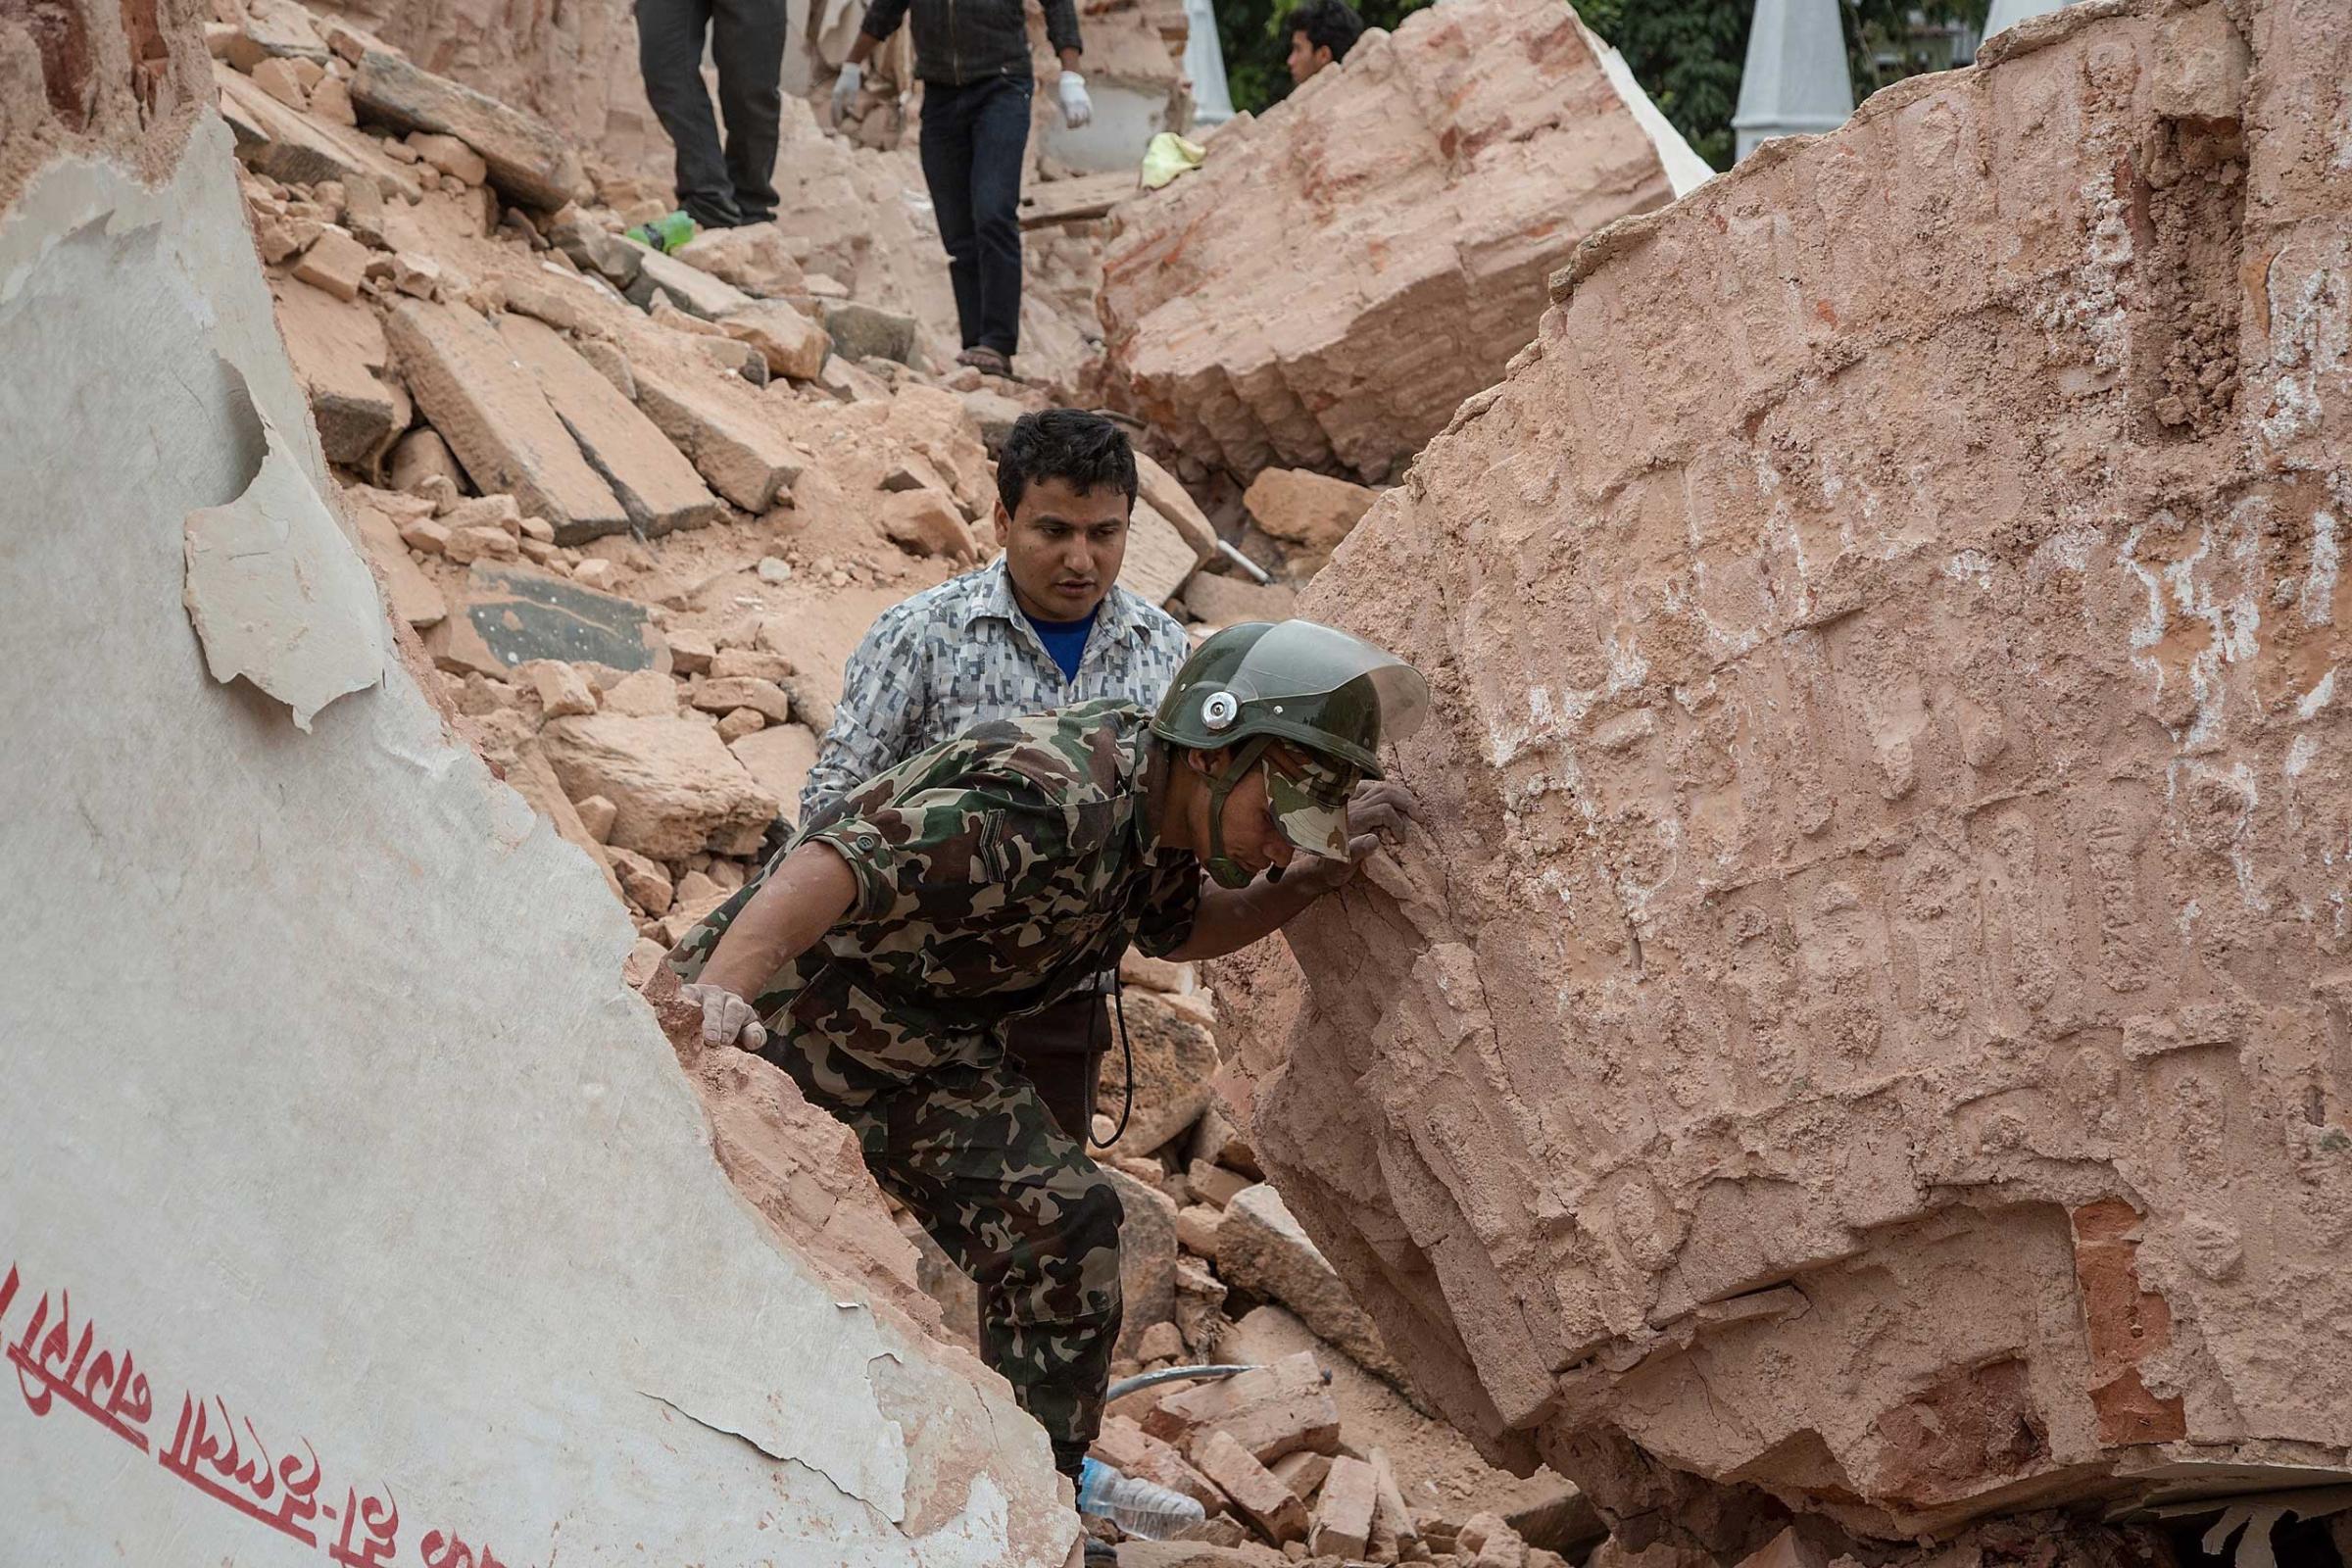 Emergency rescue workers search for survivors in the debris of Dharara tower in Kathmandu after it collapsed.